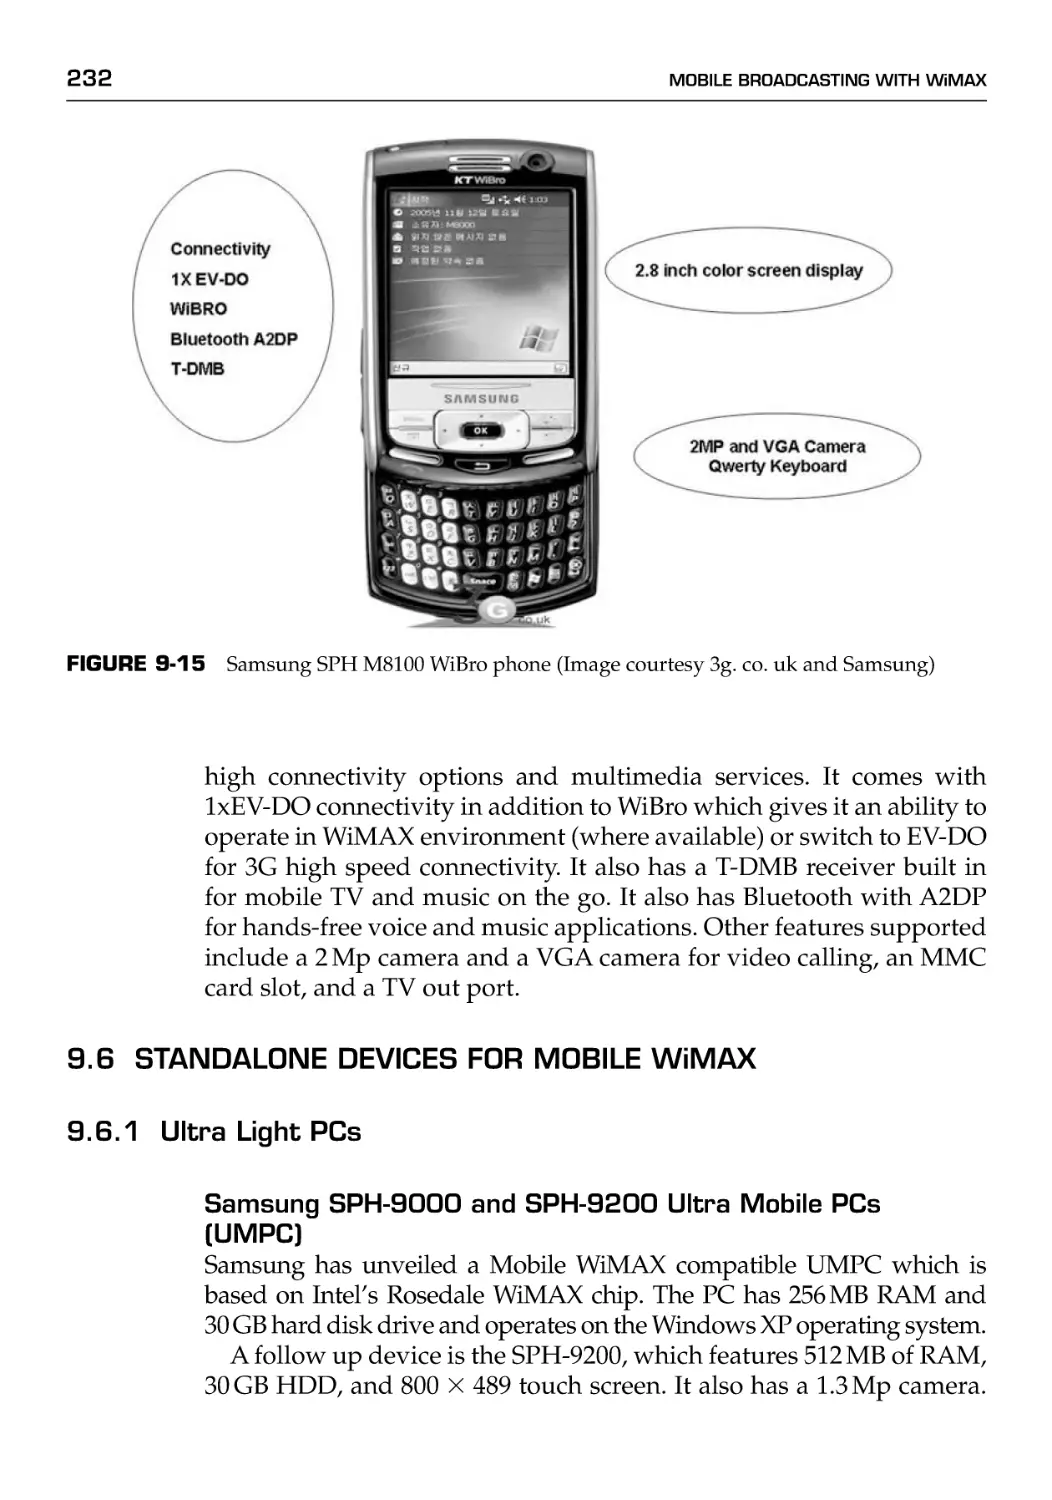 9.6 Standalone Devices for Mobile WiMAX